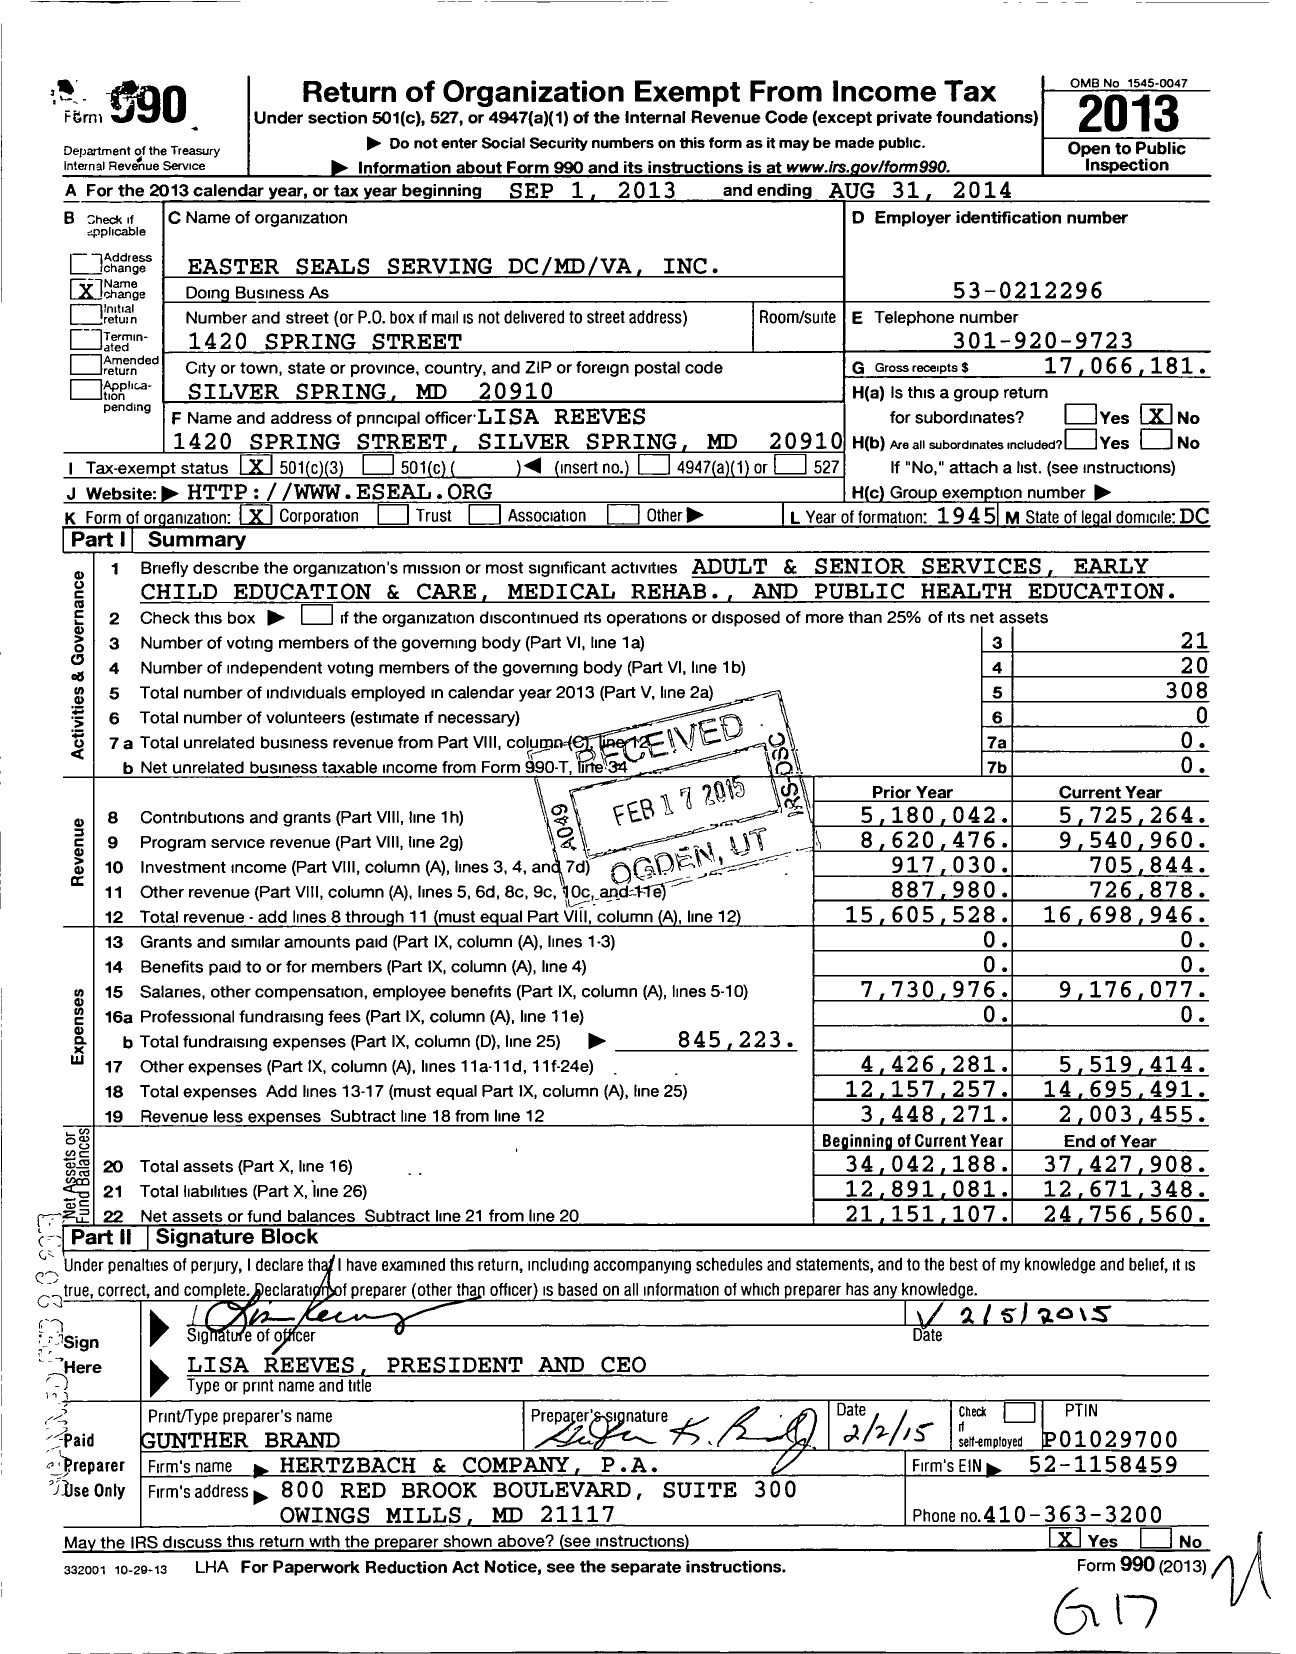 Image of first page of 2013 Form 990 for Easter Seals Serving DC MD VA